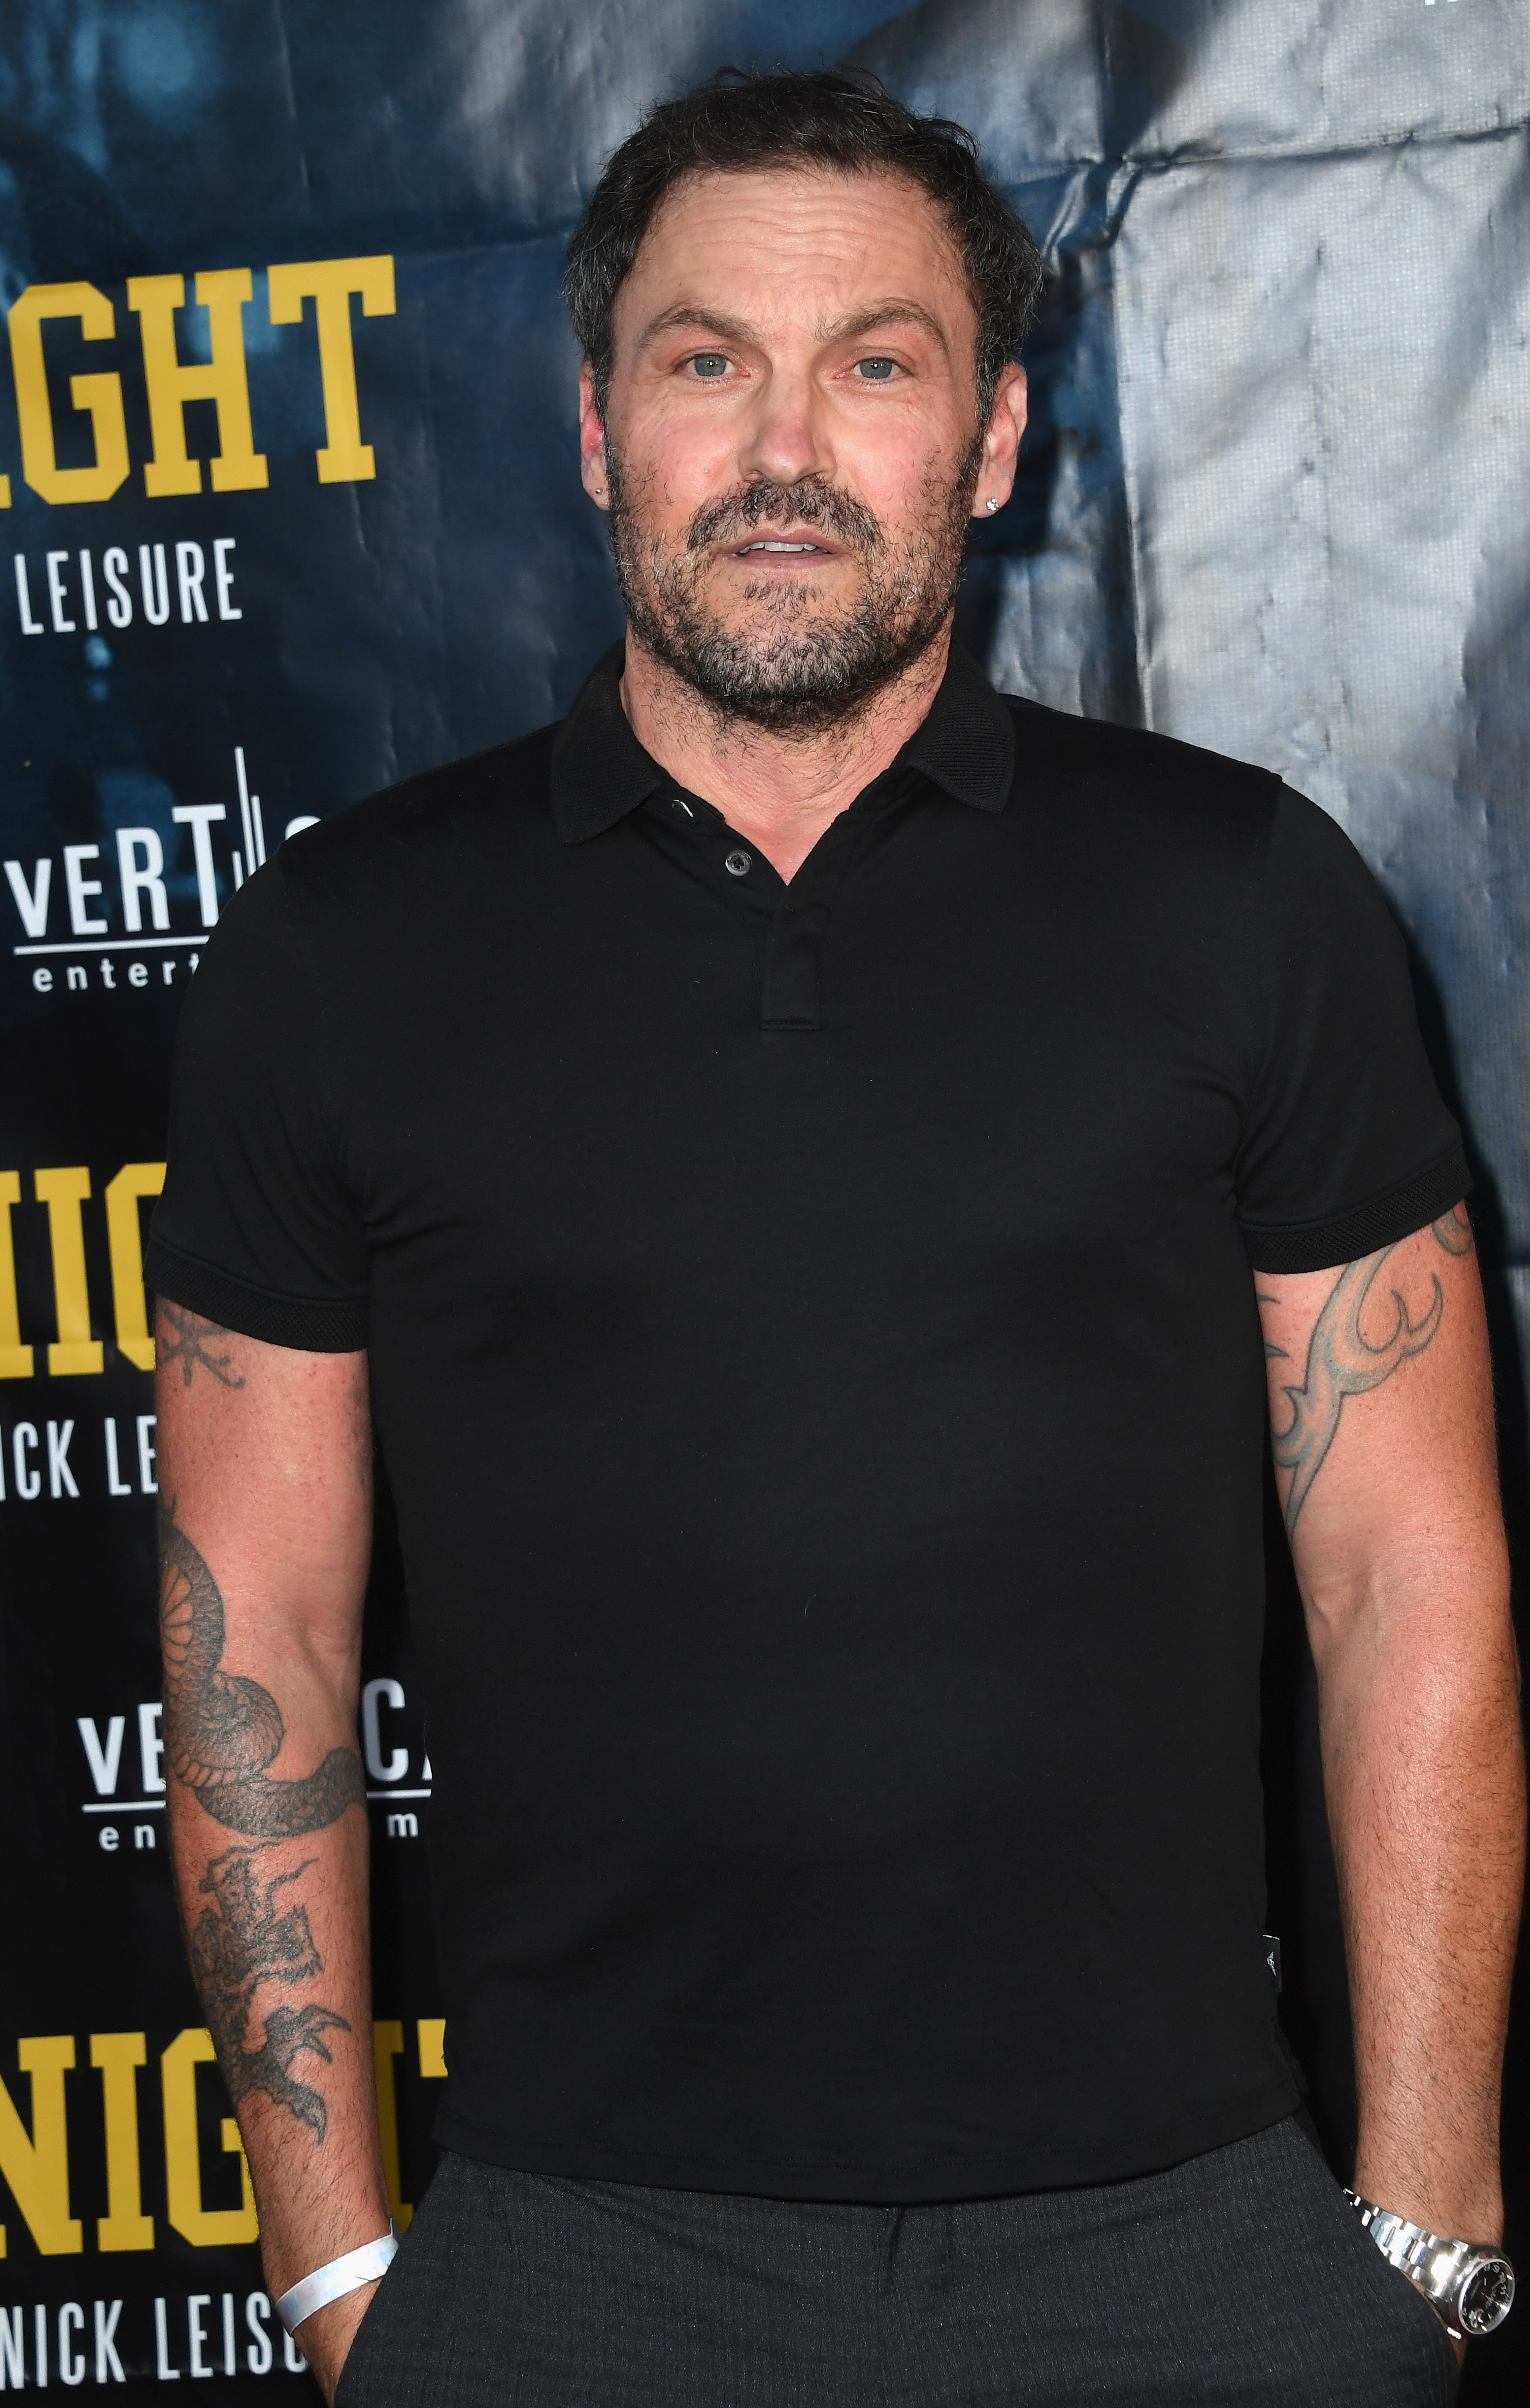 Brian Austin Green at the "Last The Night" premiere on June 30, 2022 in Beverly Hills, California | Source: Getty Images